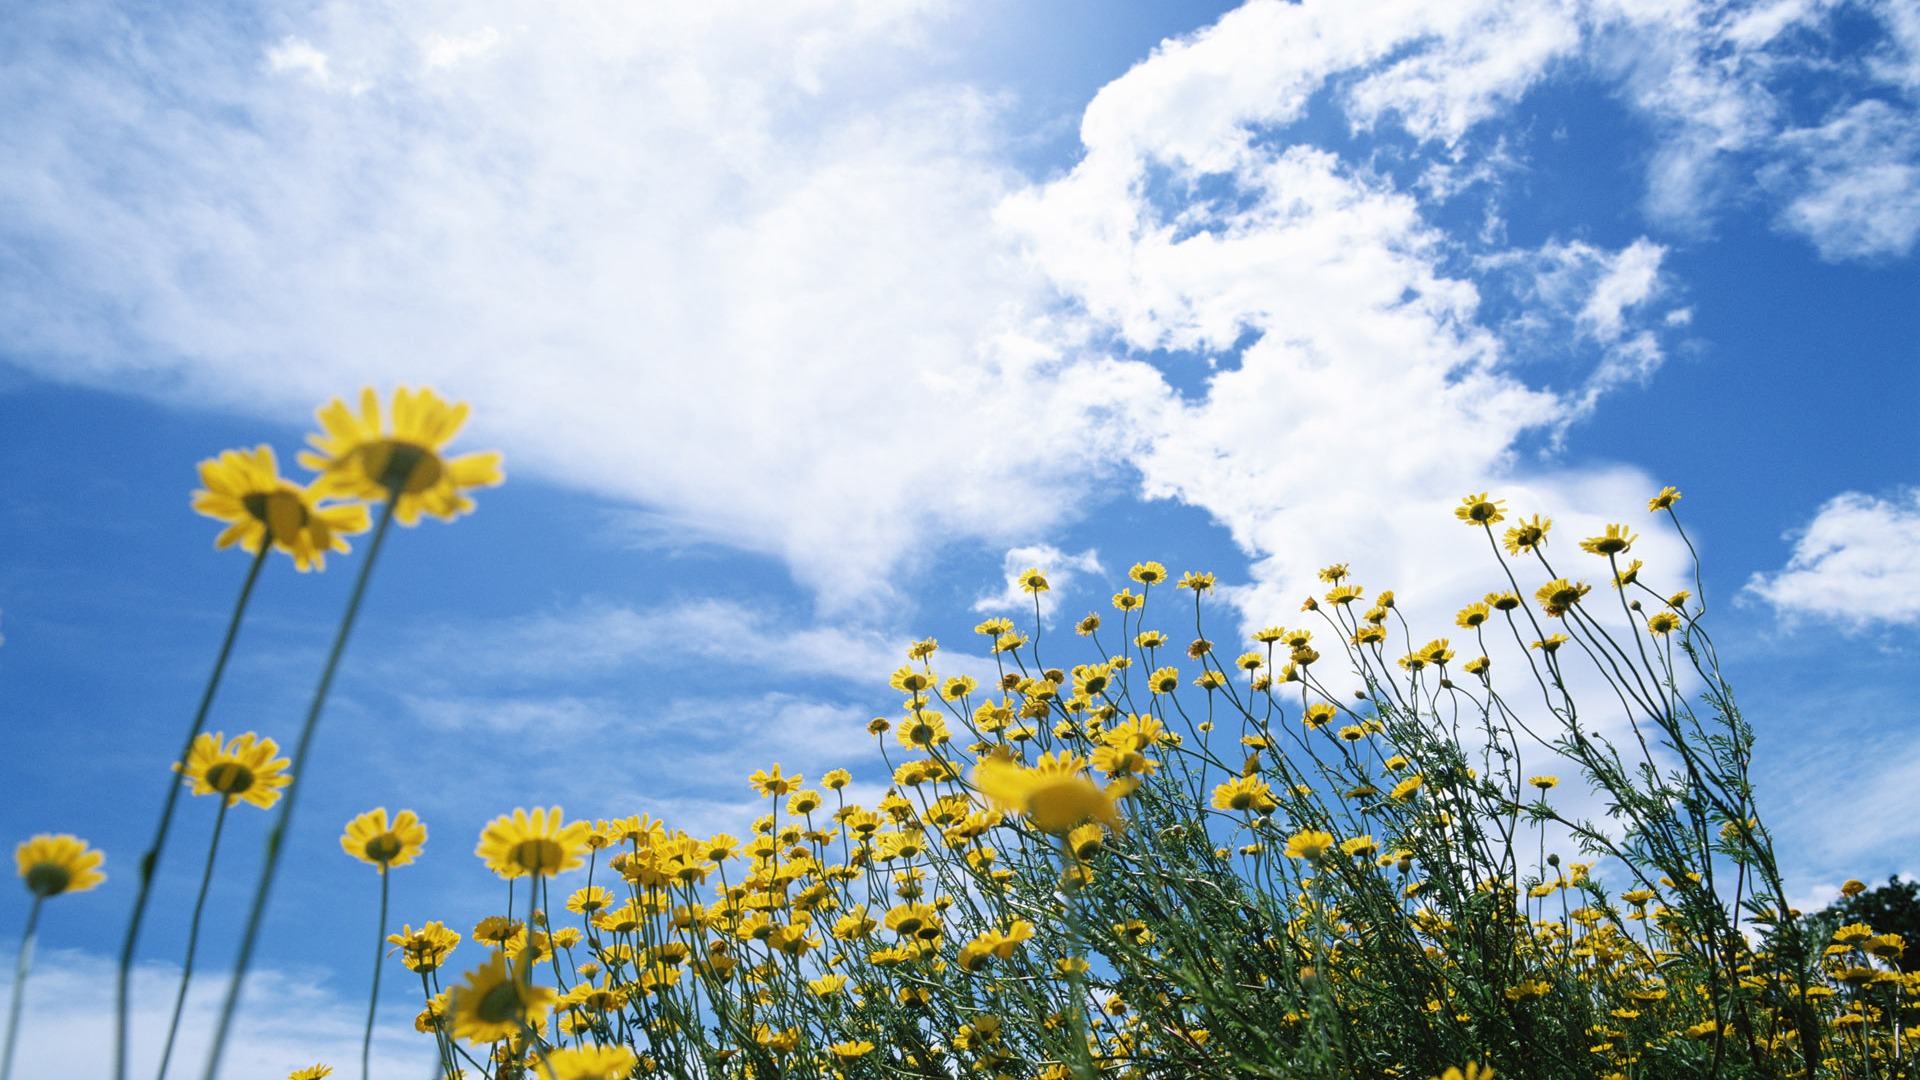 Blue sky white clouds and flowers wallpaper #12 - 1920x1080